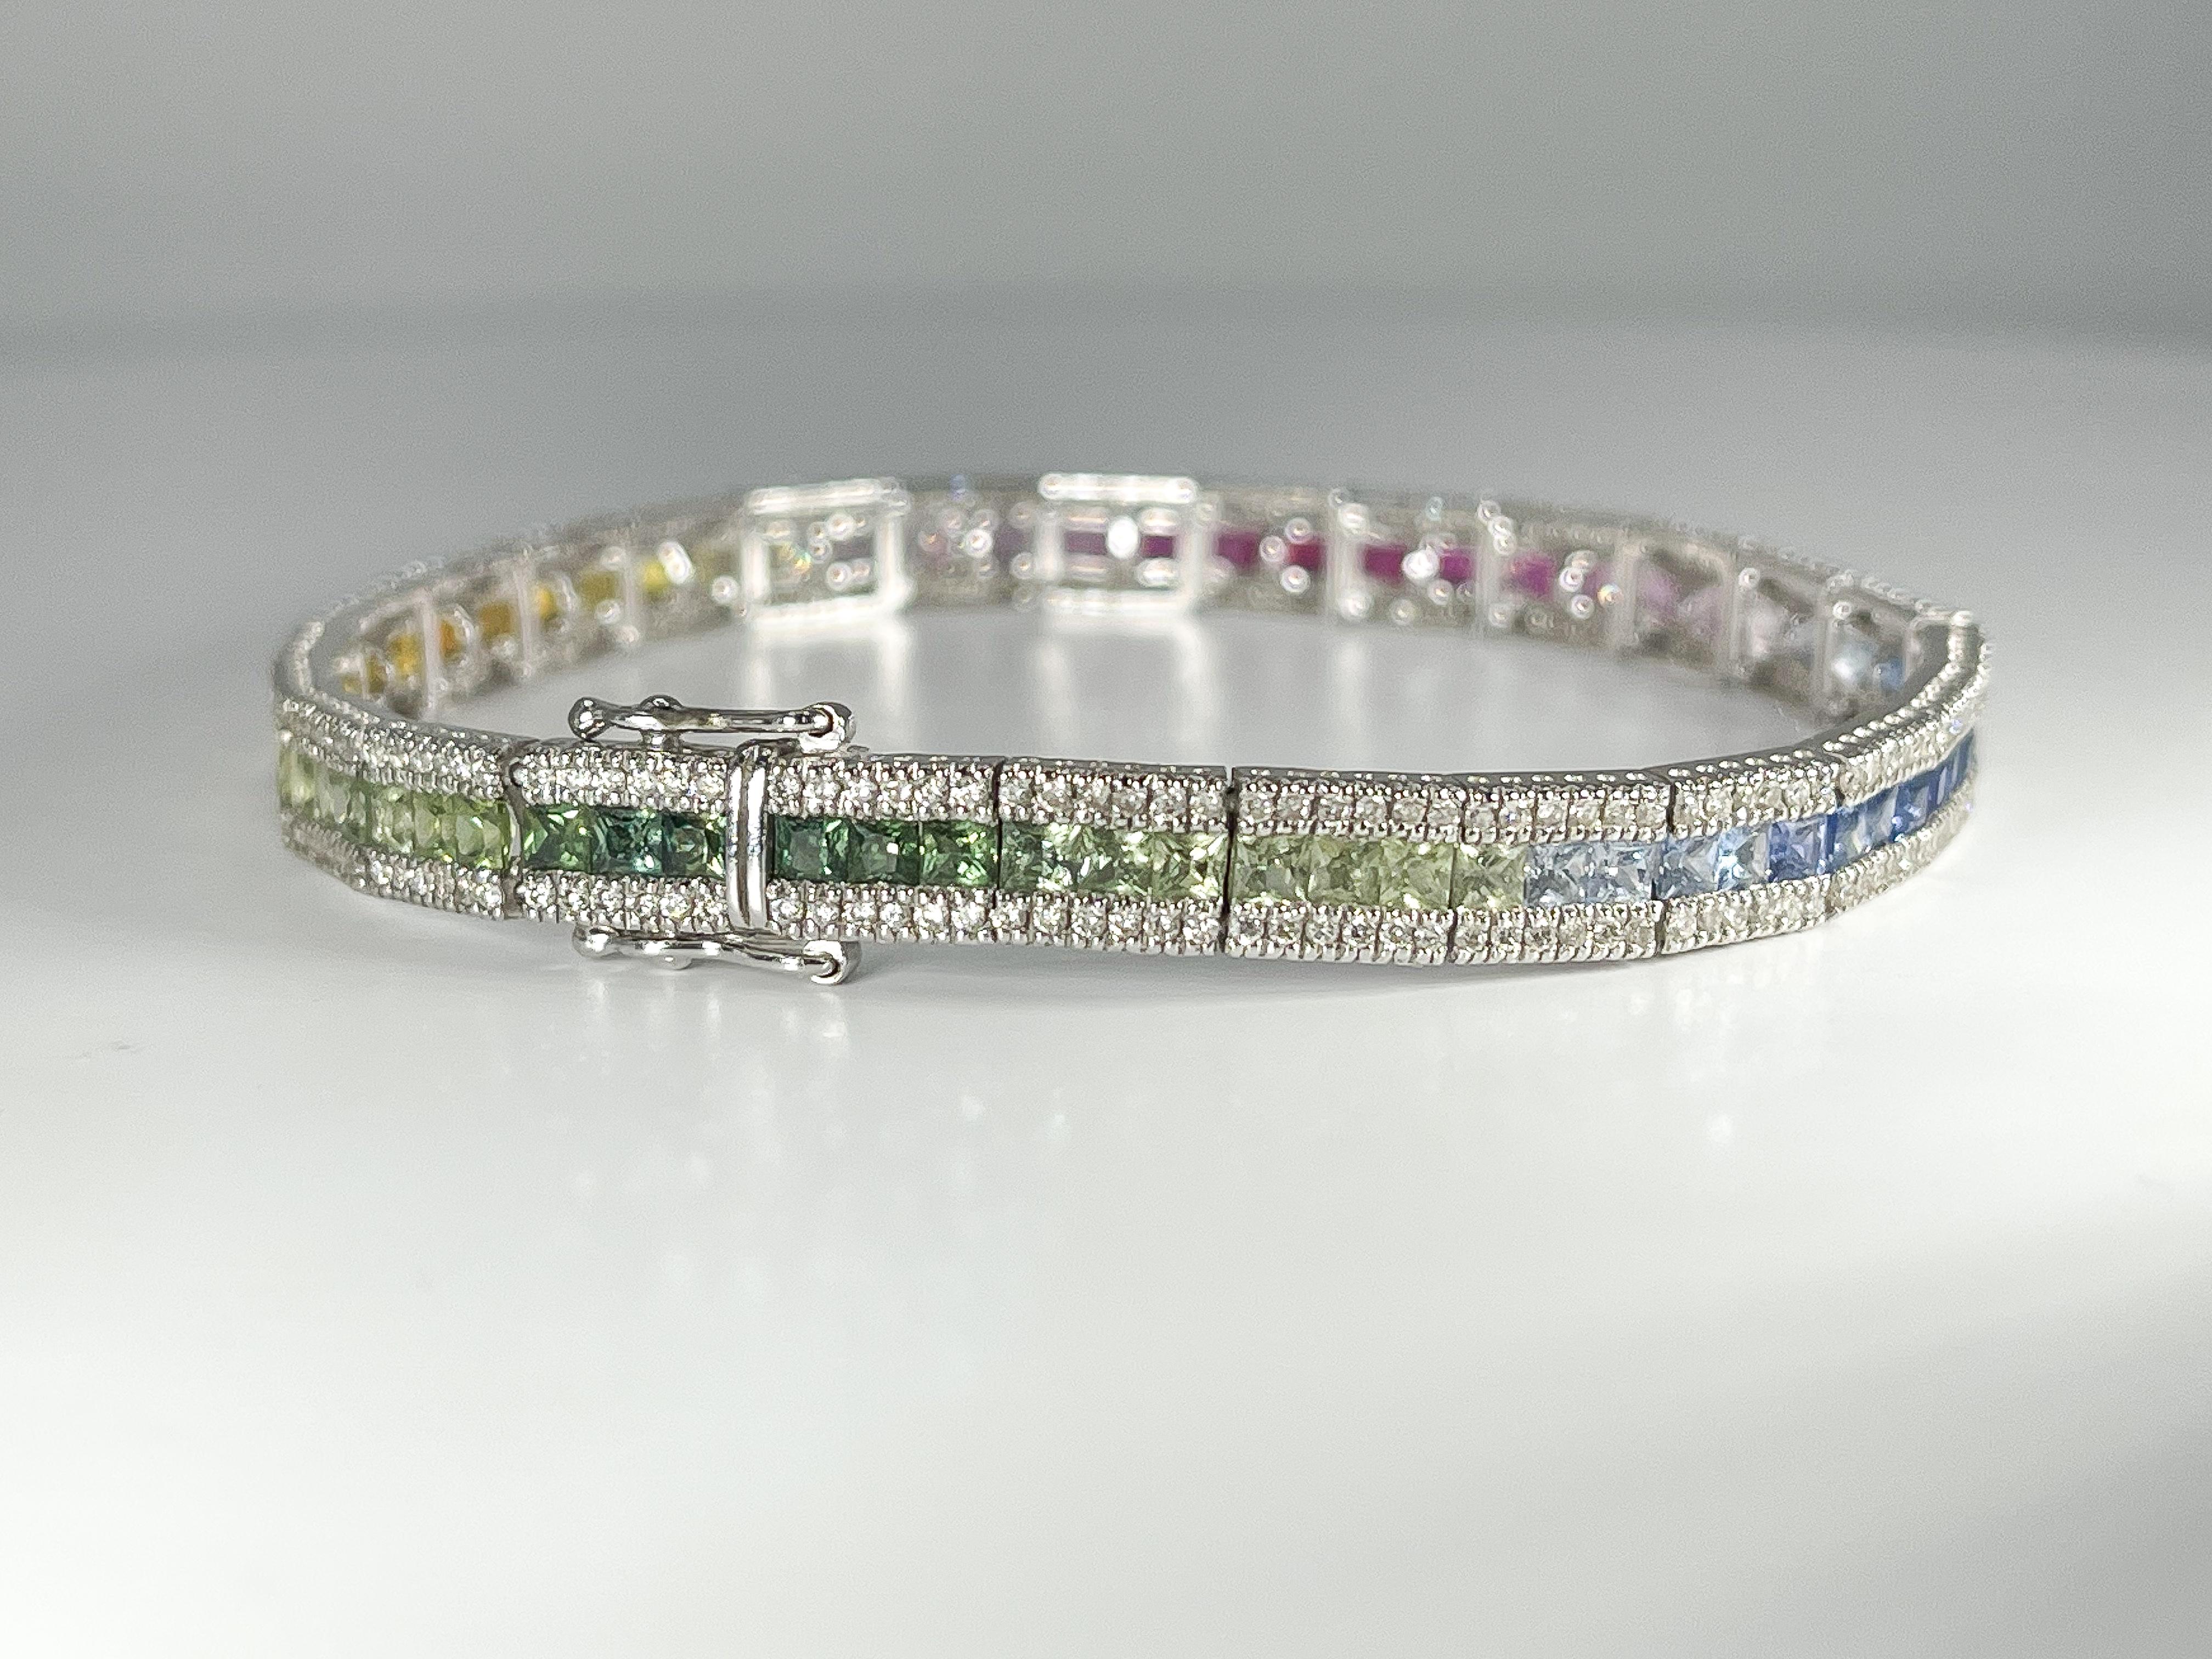 14k White Gold Colored 7.75 CTW Sapphire and 1.75 CTW Diamond Bracelet  In Excellent Condition For Sale In Stuart, FL